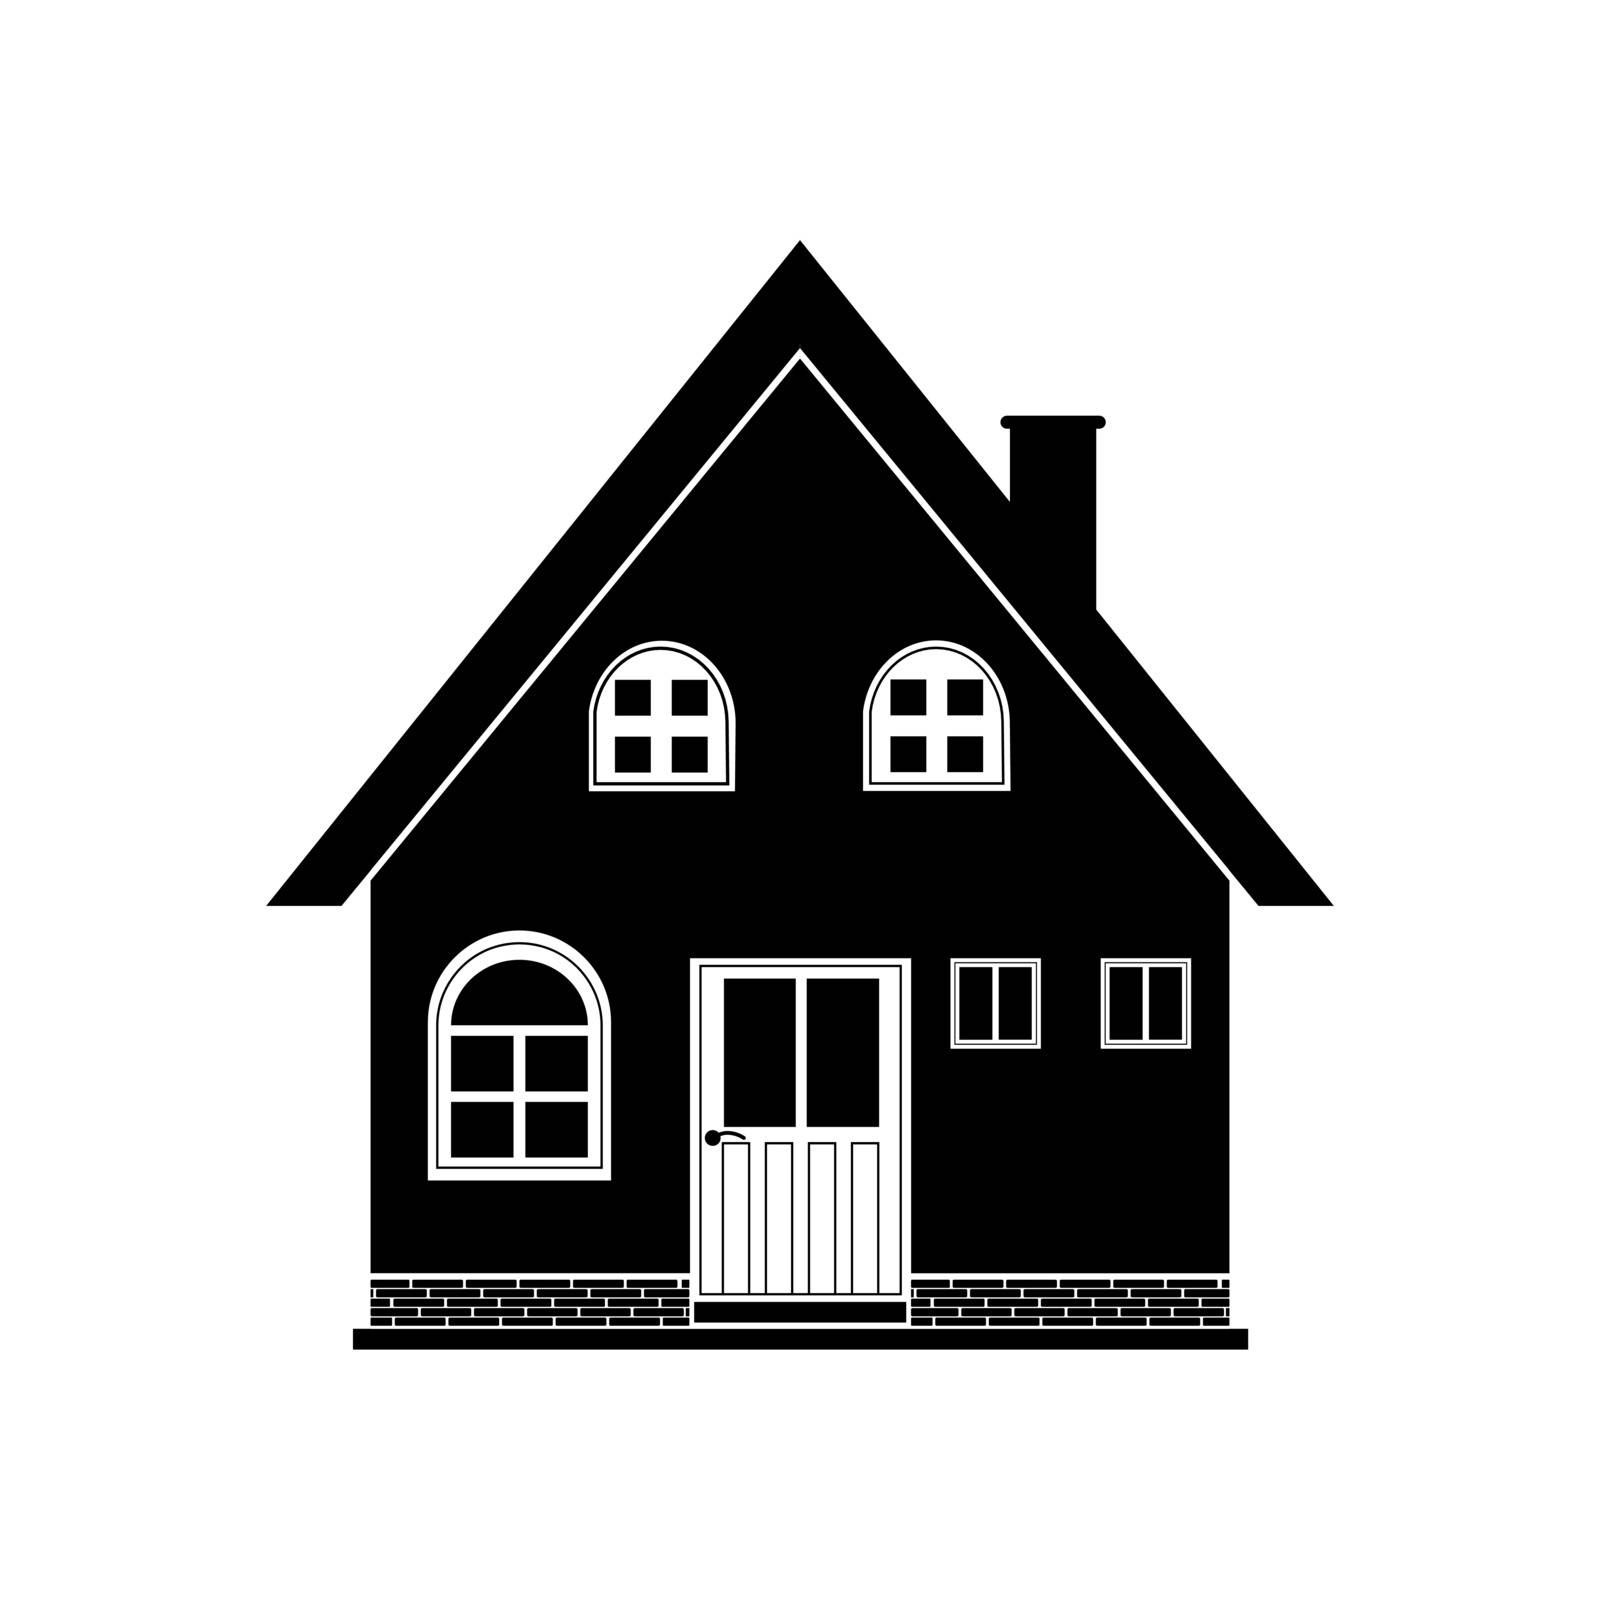 Monochromatic silhouette of a country house, flat image